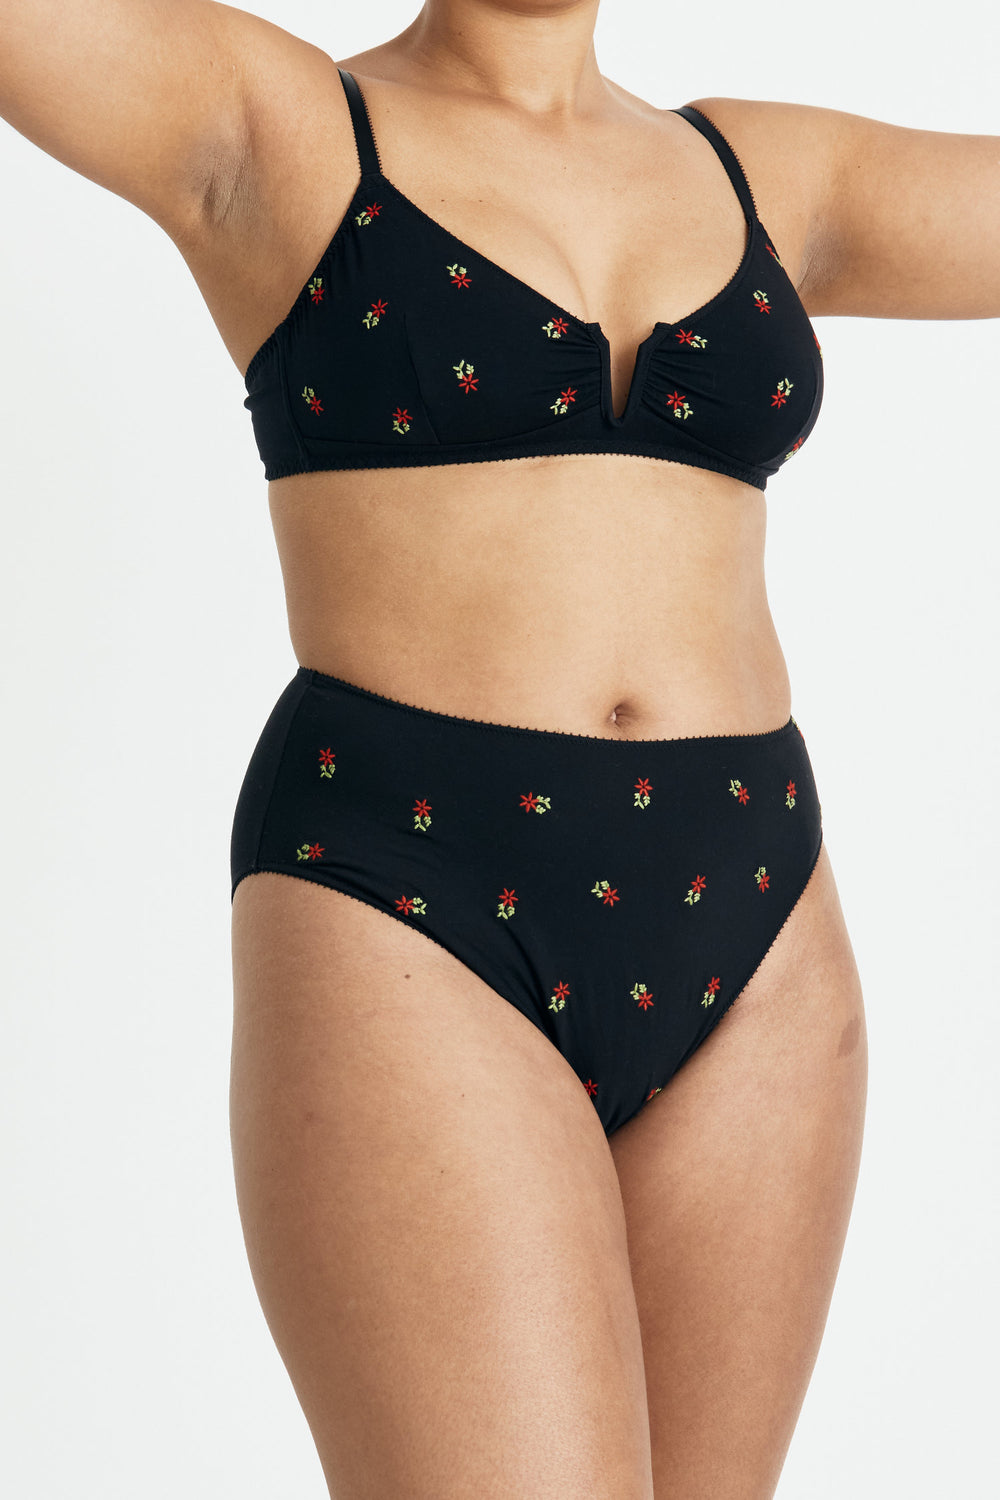 Videris Lingerie high waist knicker in black blossom embroidered TENCEL™ with soft elastics